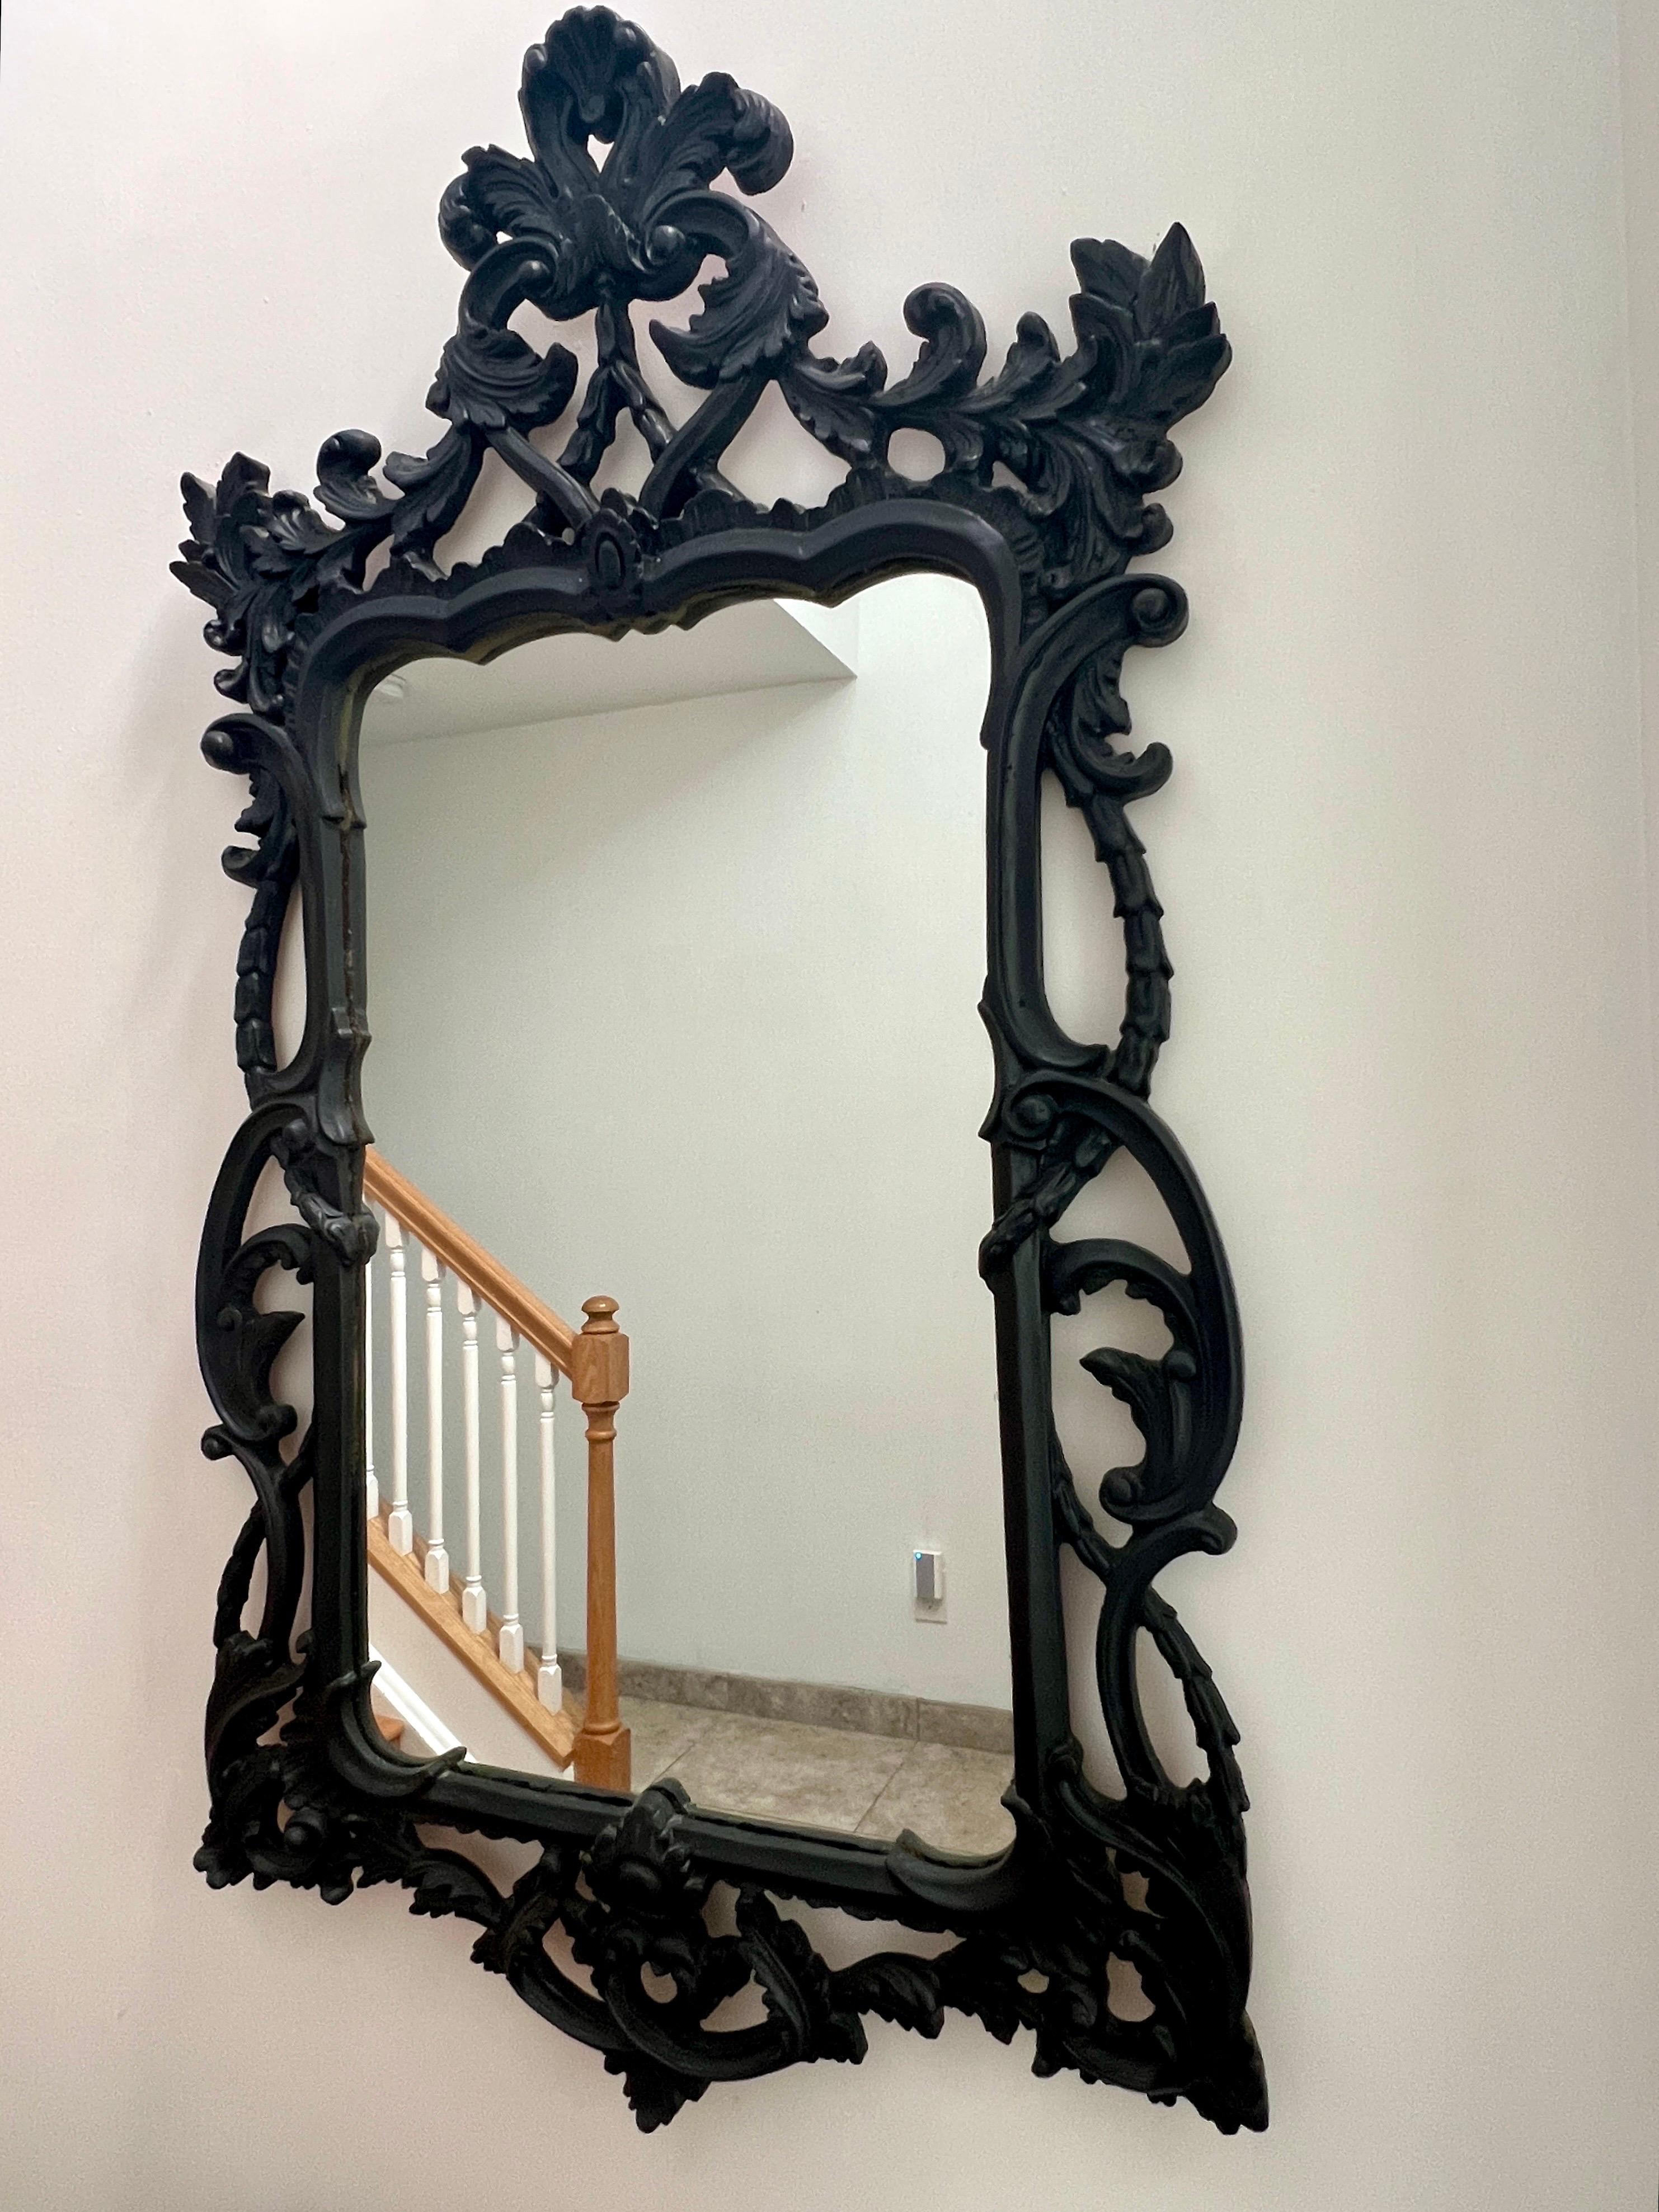 Rococo Revival Hollywood Regency Black Carved Wood Mirror with Rococo Frame, Italy C. 1970's For Sale